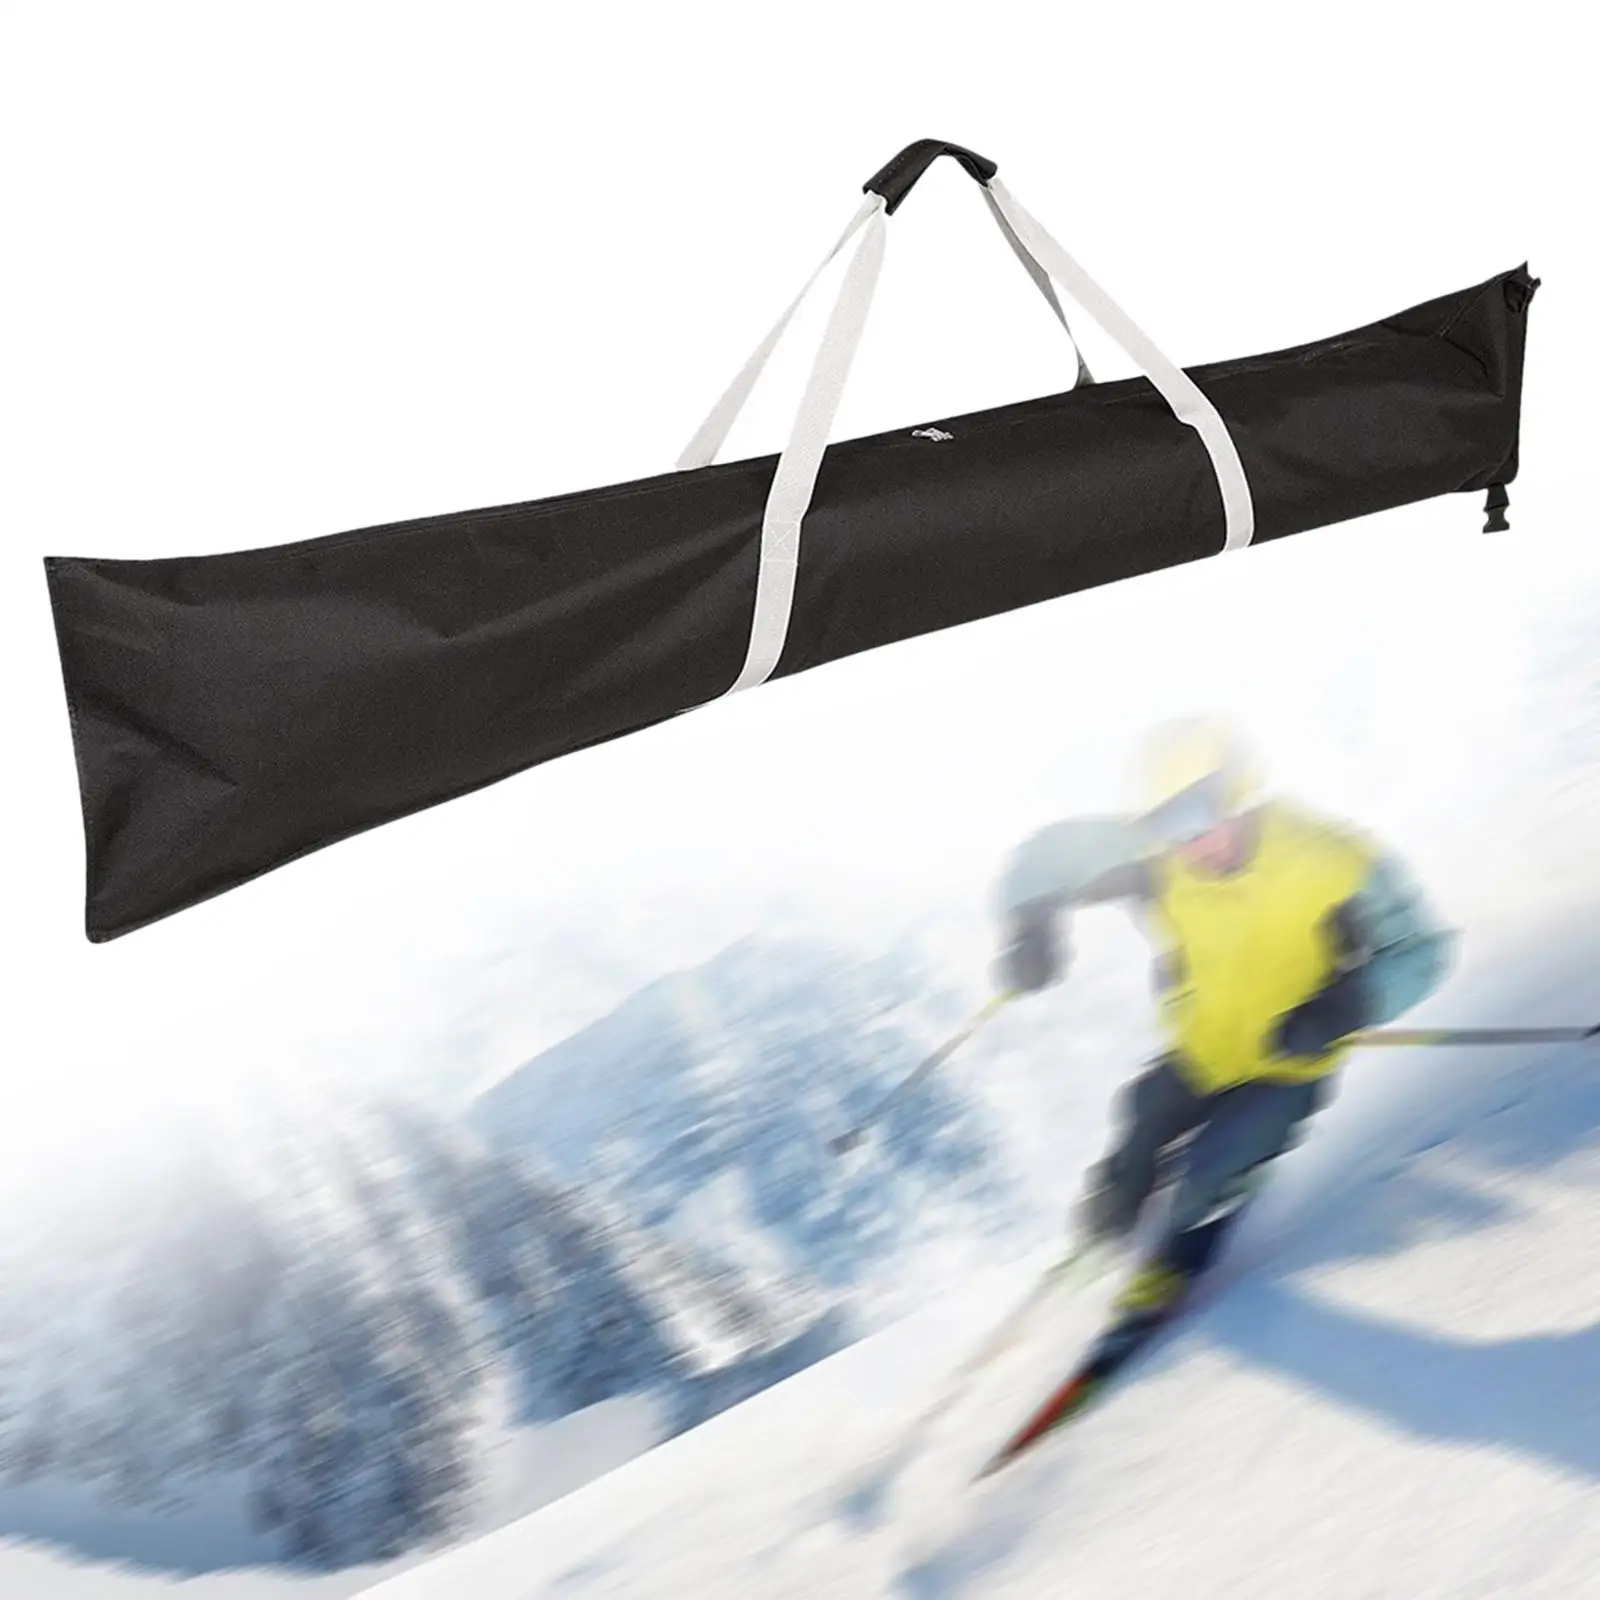 Ski Bag with Handle Snow Travel Transport Protective Adjustable Durable Ski Travel Bag for Gloves Skiing Winter Sports Outdoor